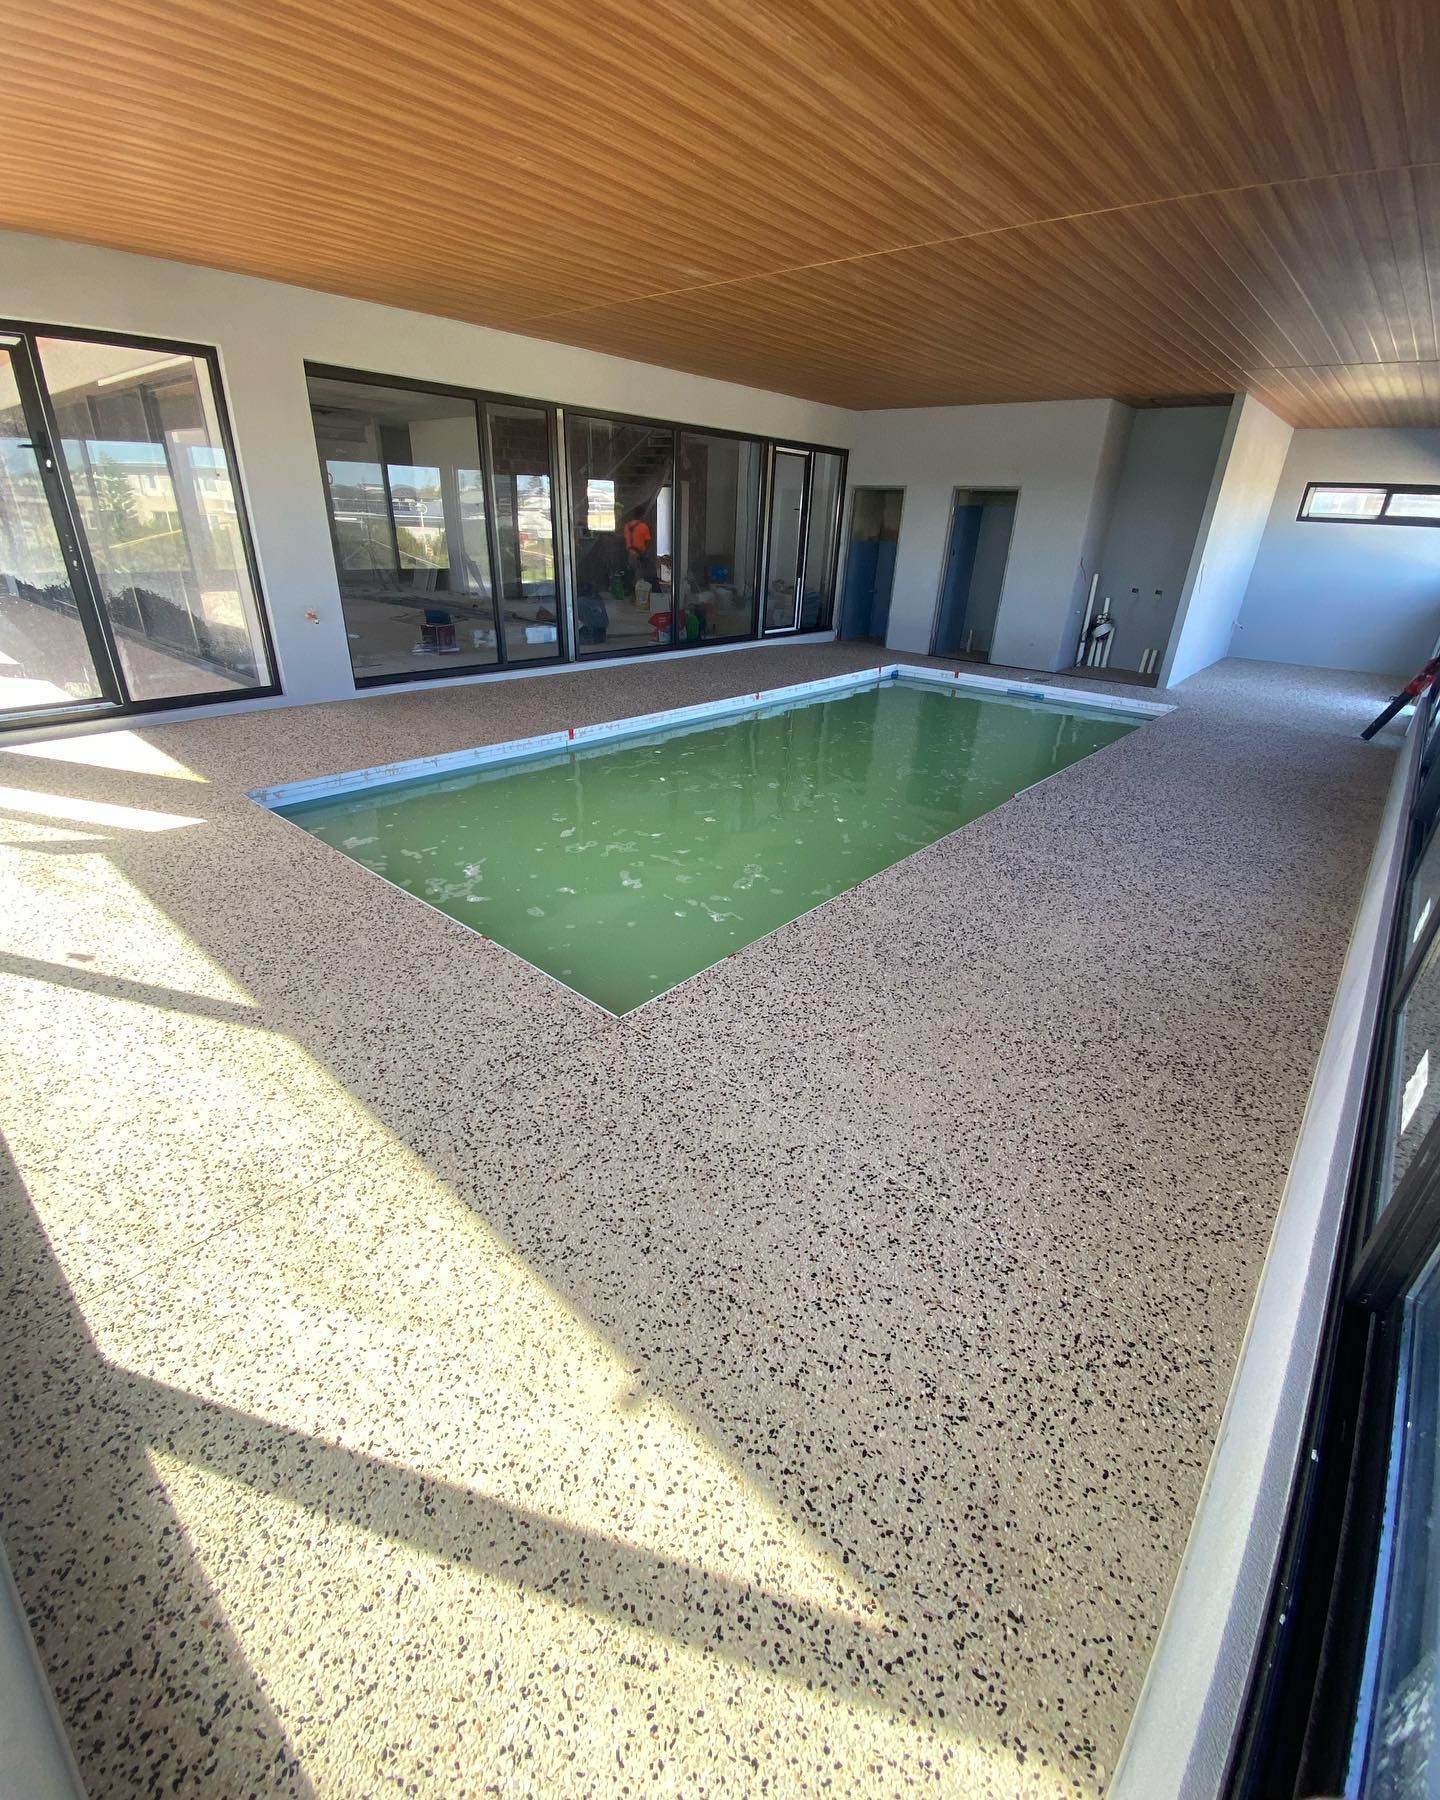 Honed aggregate pool surround services